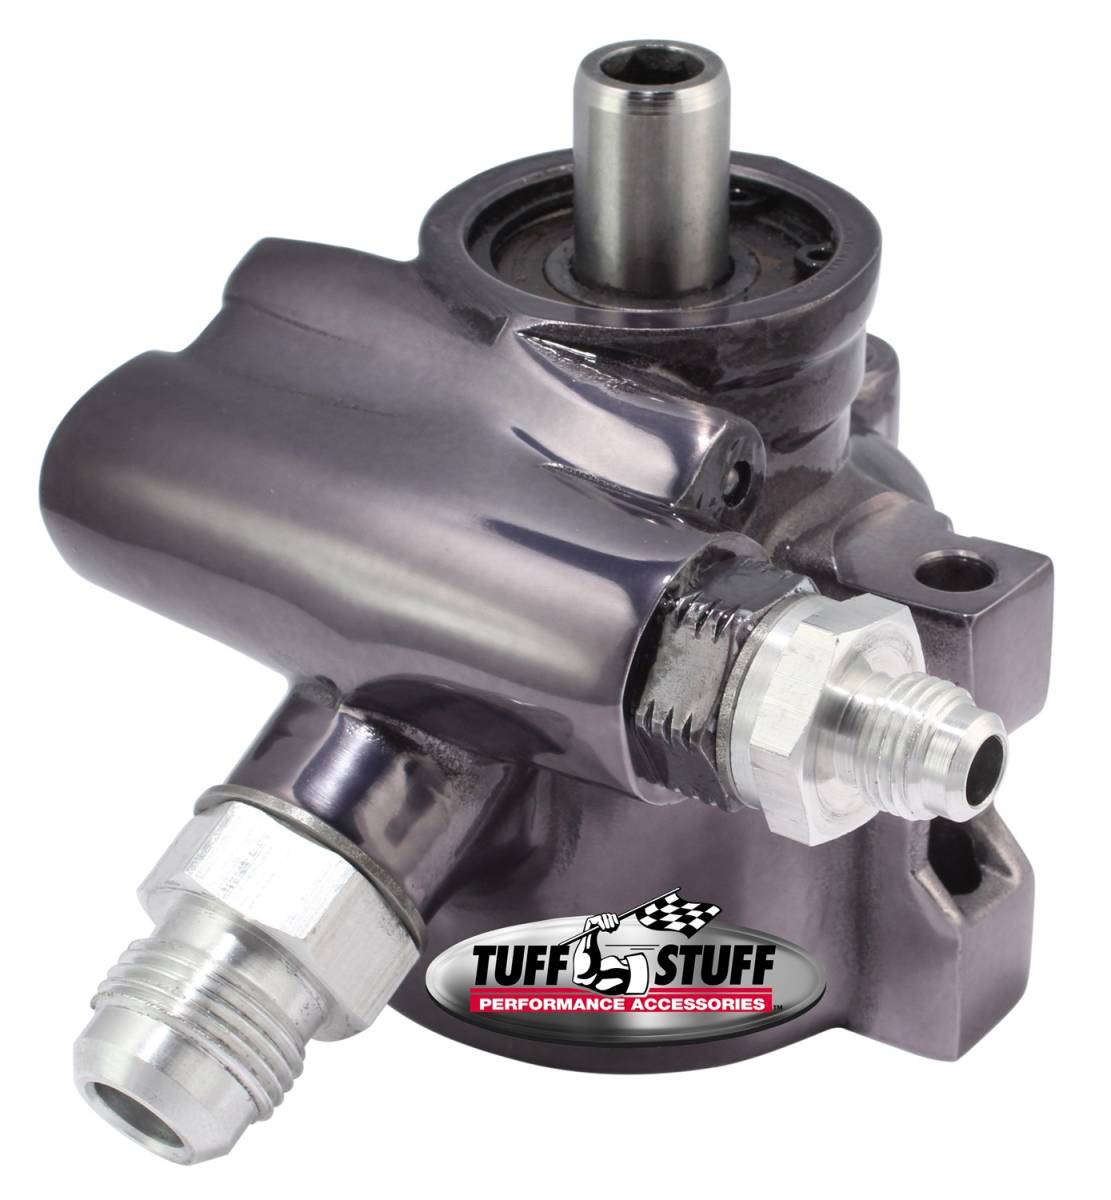 Tuff Stuff Performance - Type II Alum. Power Steering Pump An-6 And AN-10 Fittings M8x1.25 Threaded Hole Mounting Aluminum For Street Rods/Custom Vehicles w/Limited Engine Space Black Chrome 6175ALP-27